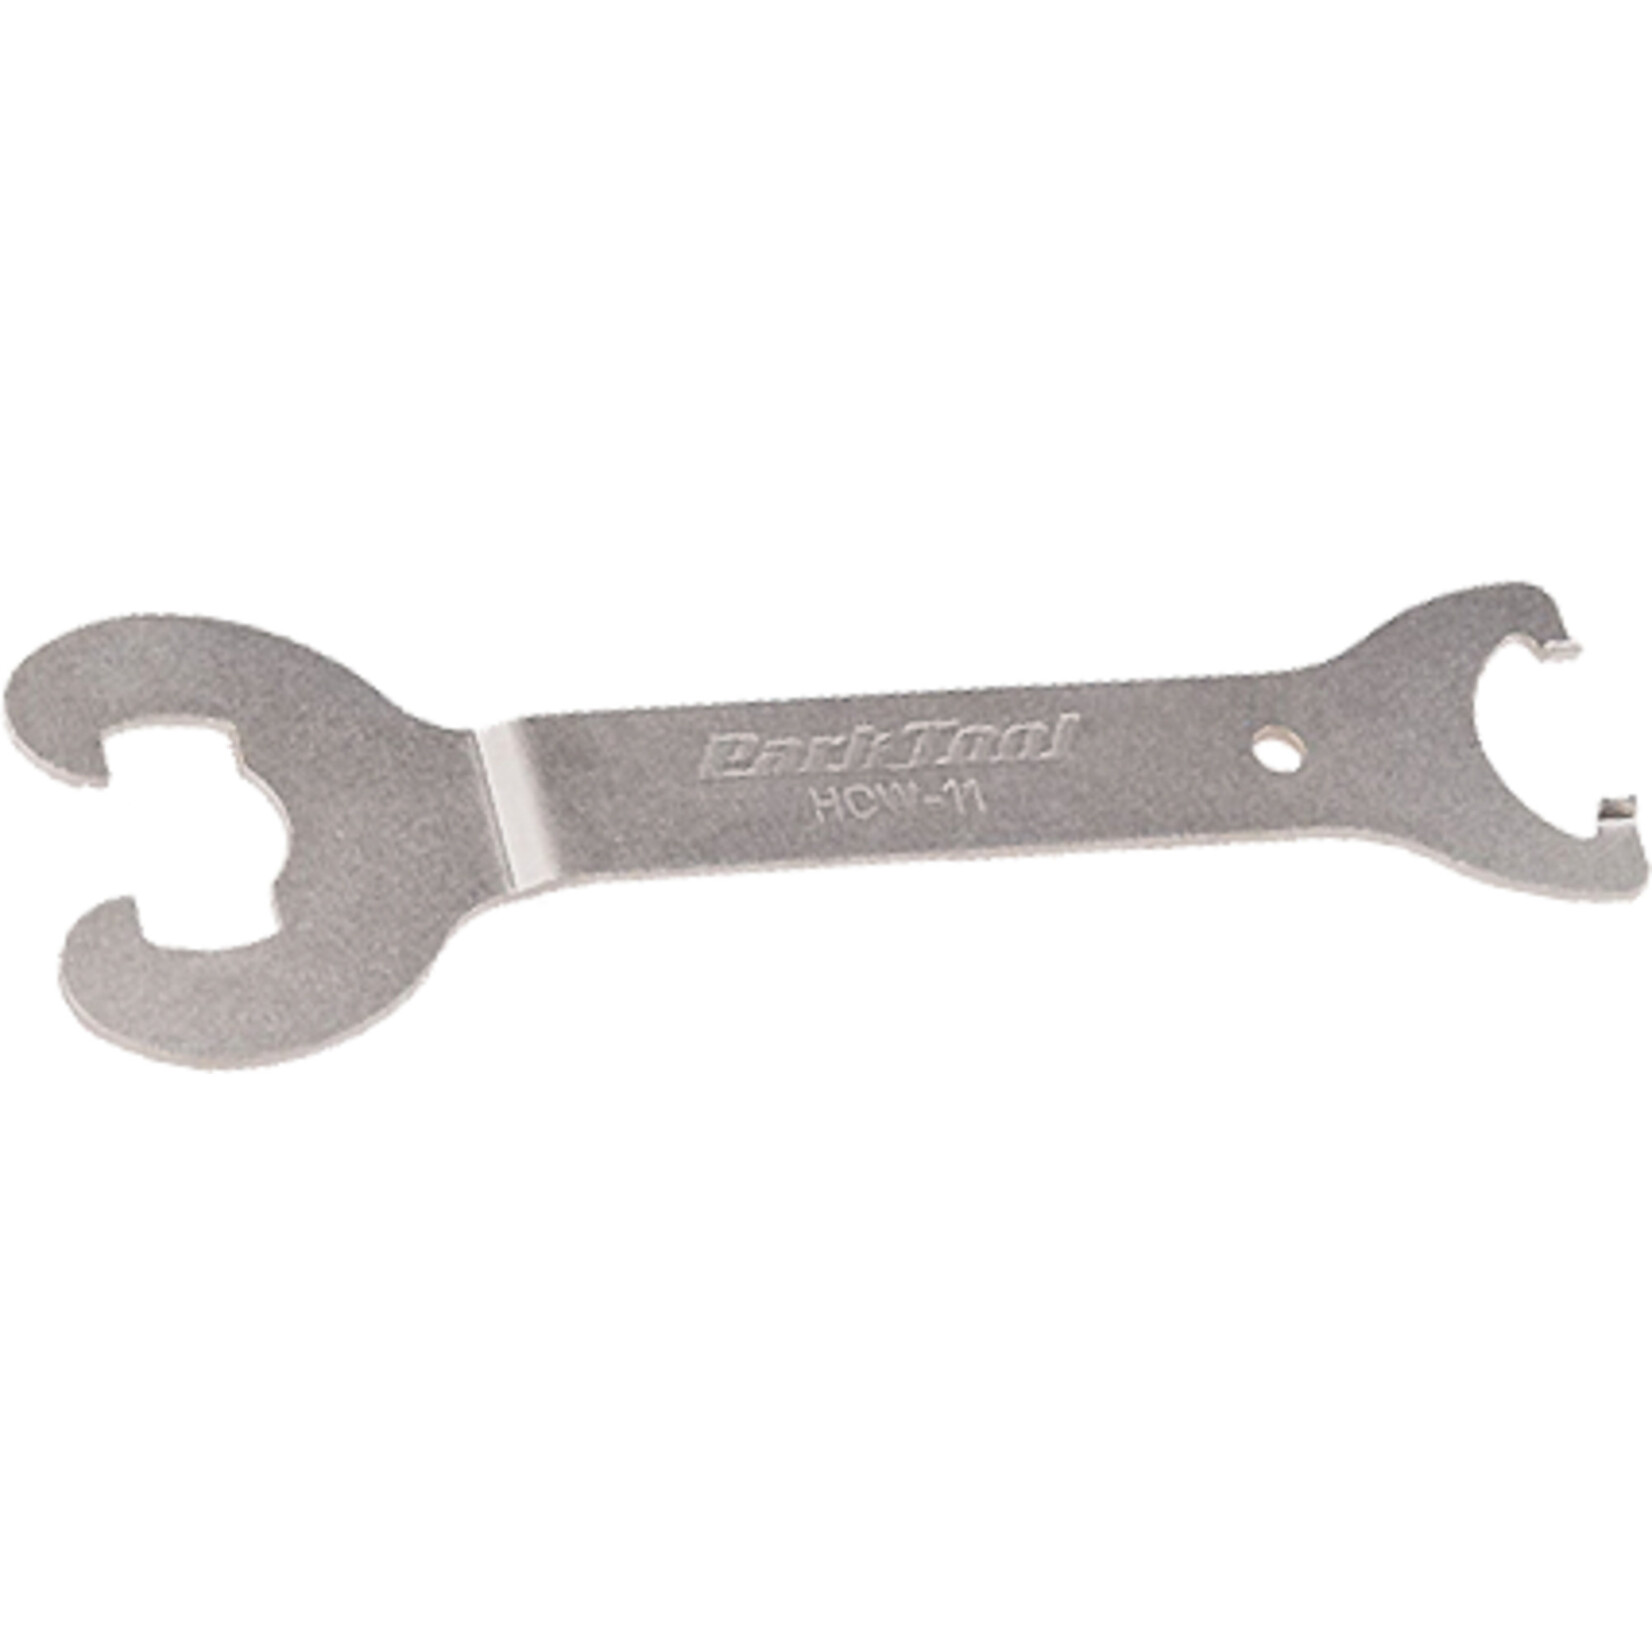 Park Tool PARK HCW-11 Adjustable BB Cup Wrench